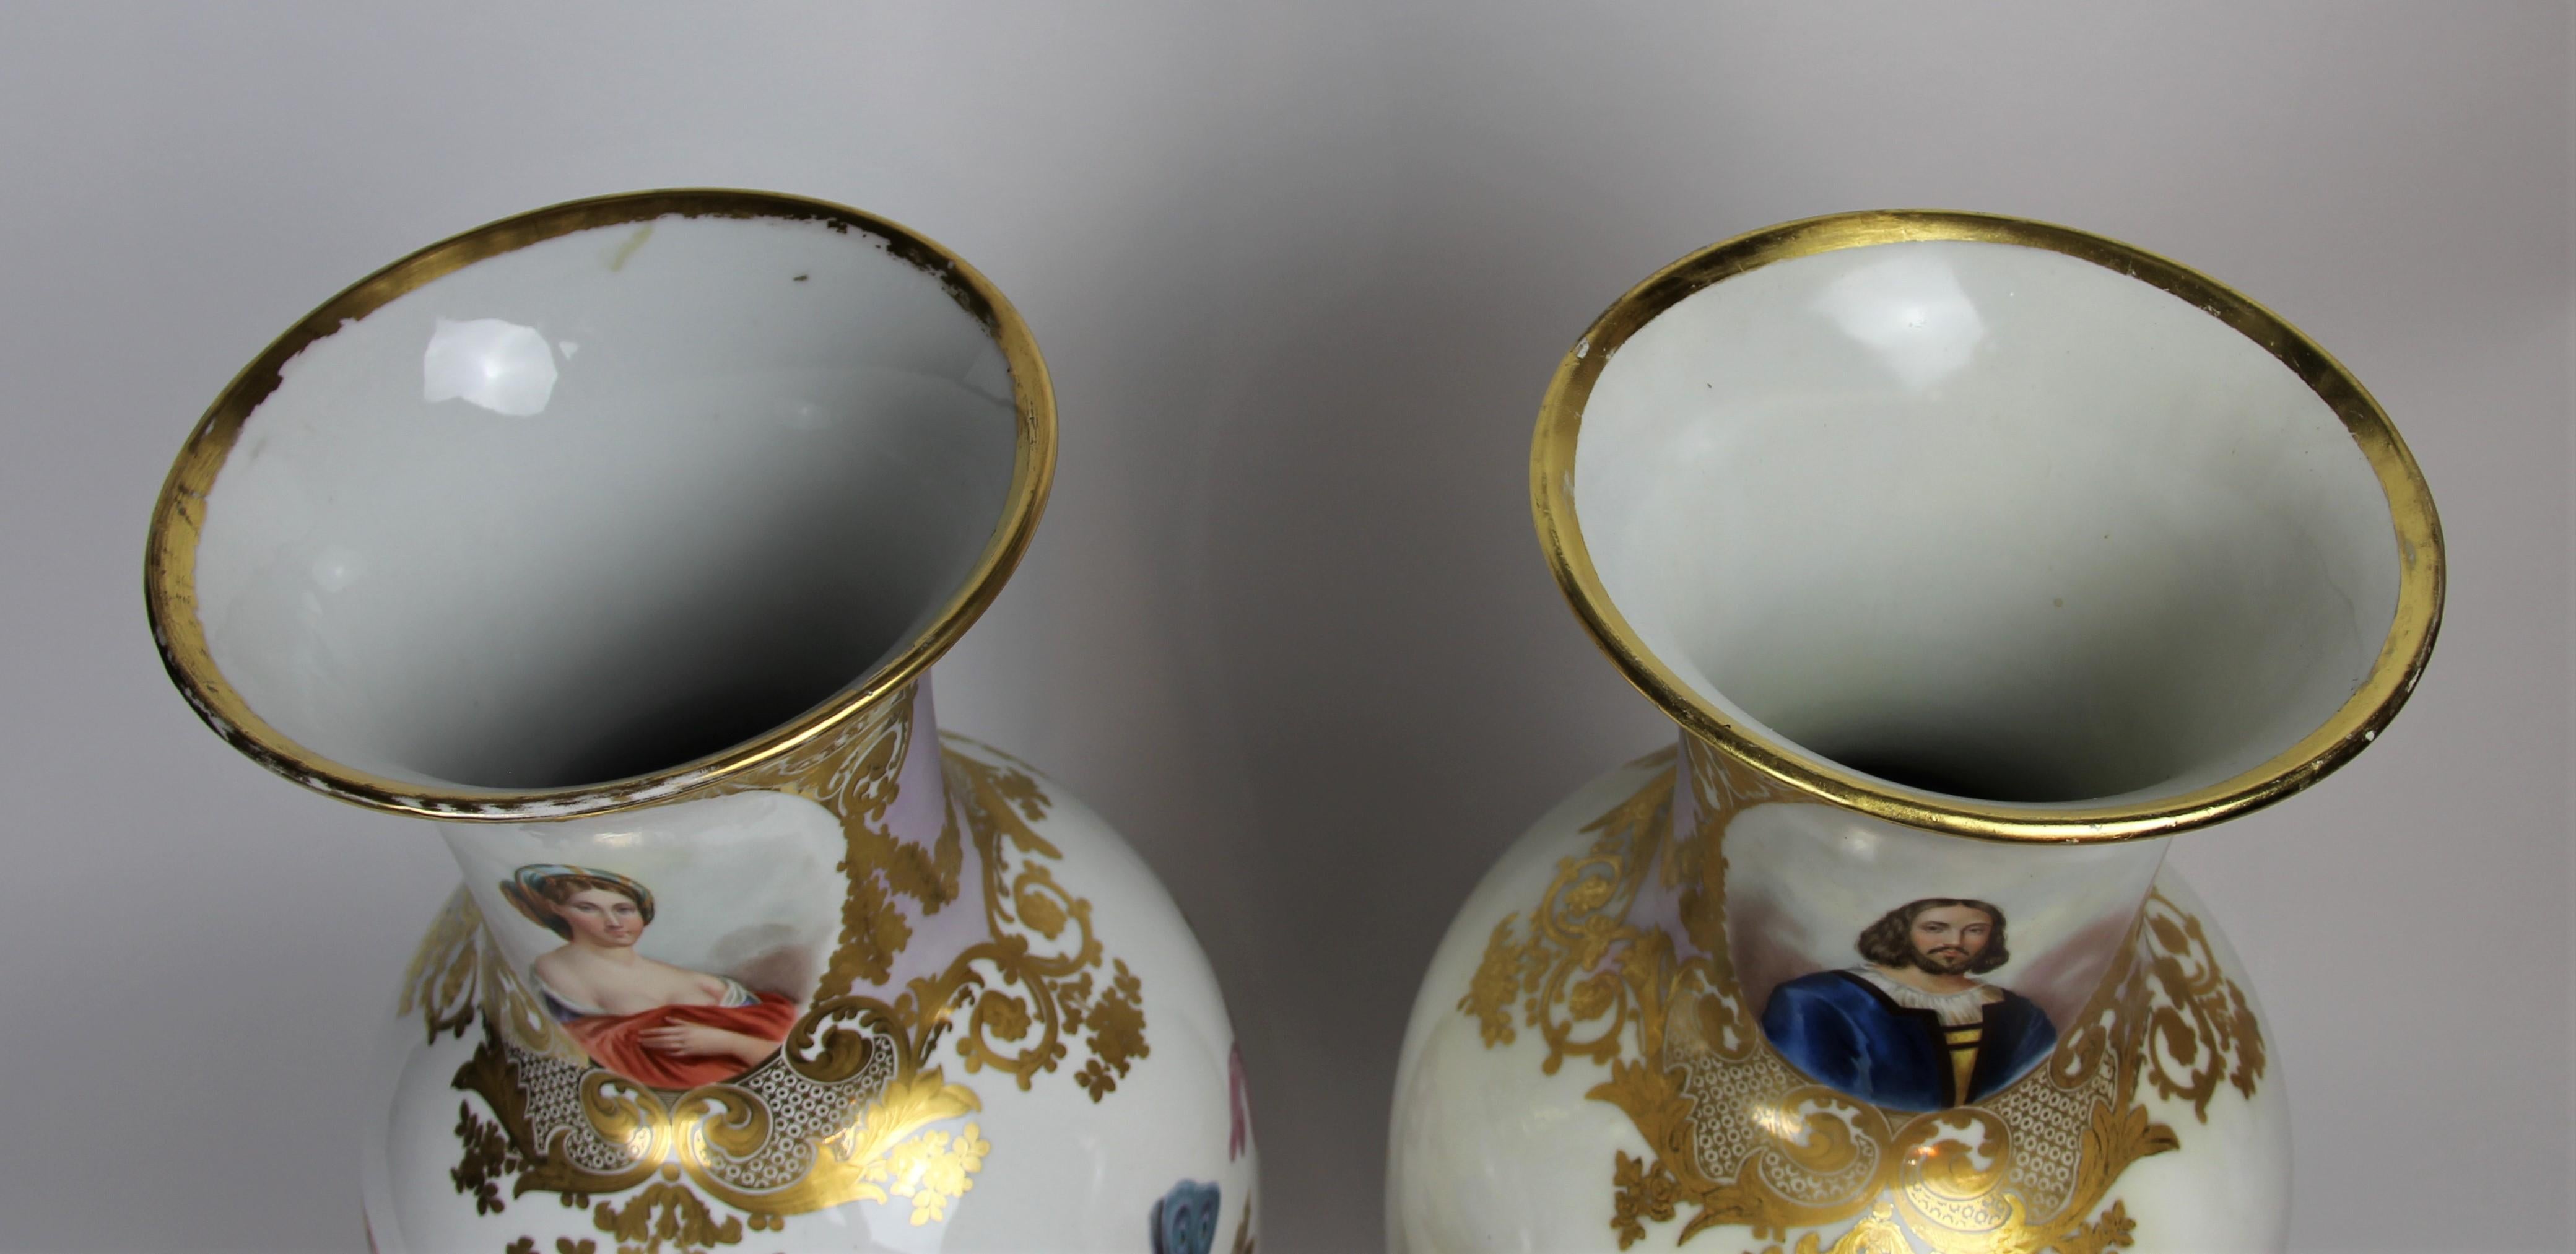 Monumental Pair of Old Paris Porcelain Vases with Dancing Figures of Angles For Sale 12